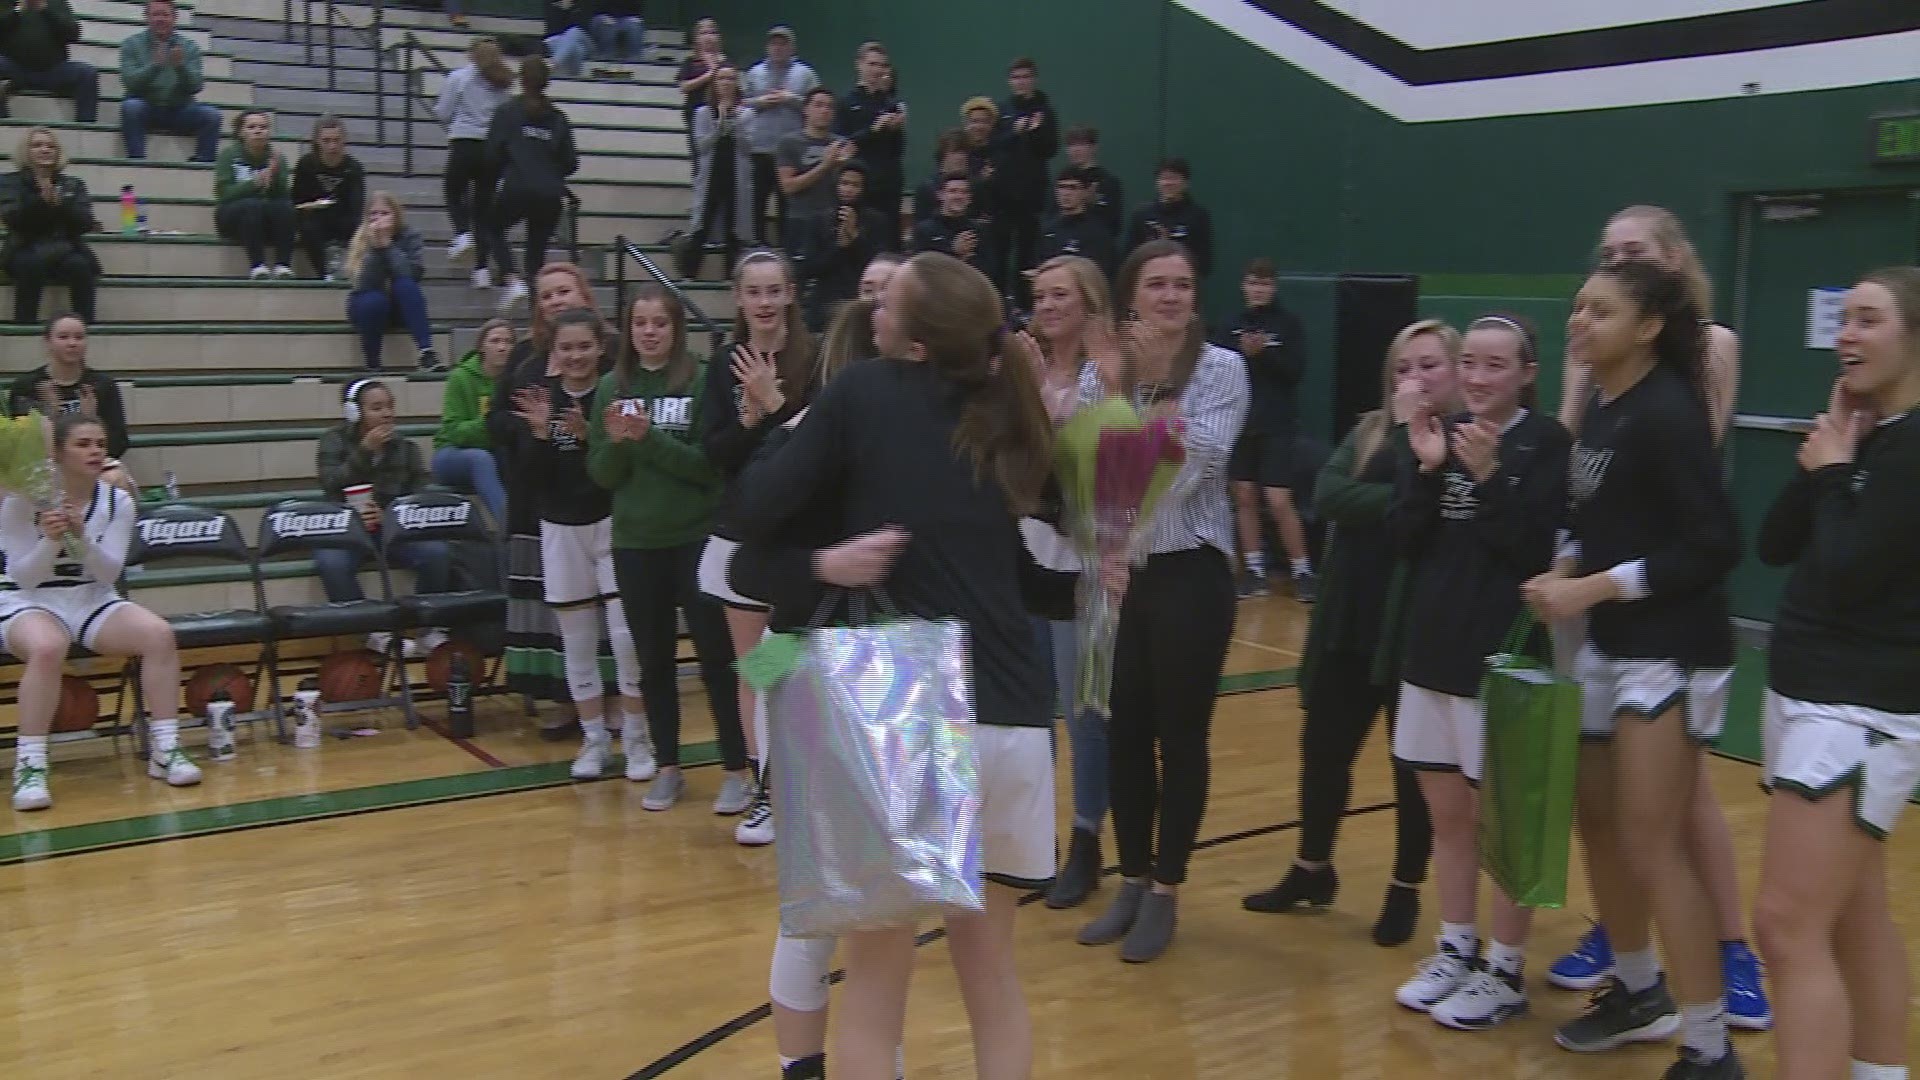 Highlights of No. 7 Oregon City's 49-40 win over Tigard on Feb. 28, 2020. Highlights are part of KGW's Friday Night Hoops with Orlando Sanchez.